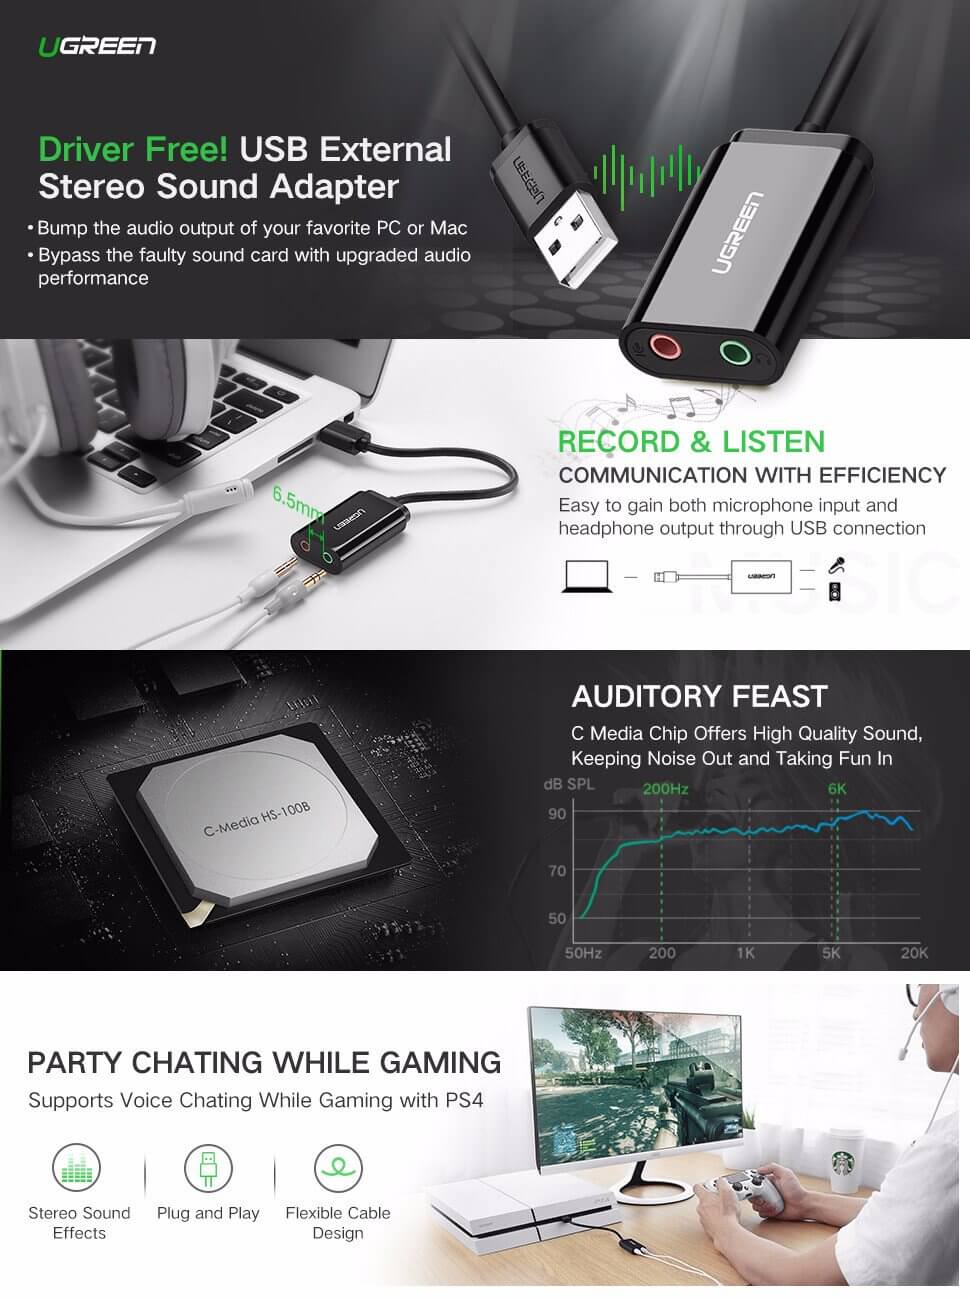 USB Audio Adapter External Stereo Sound Card features